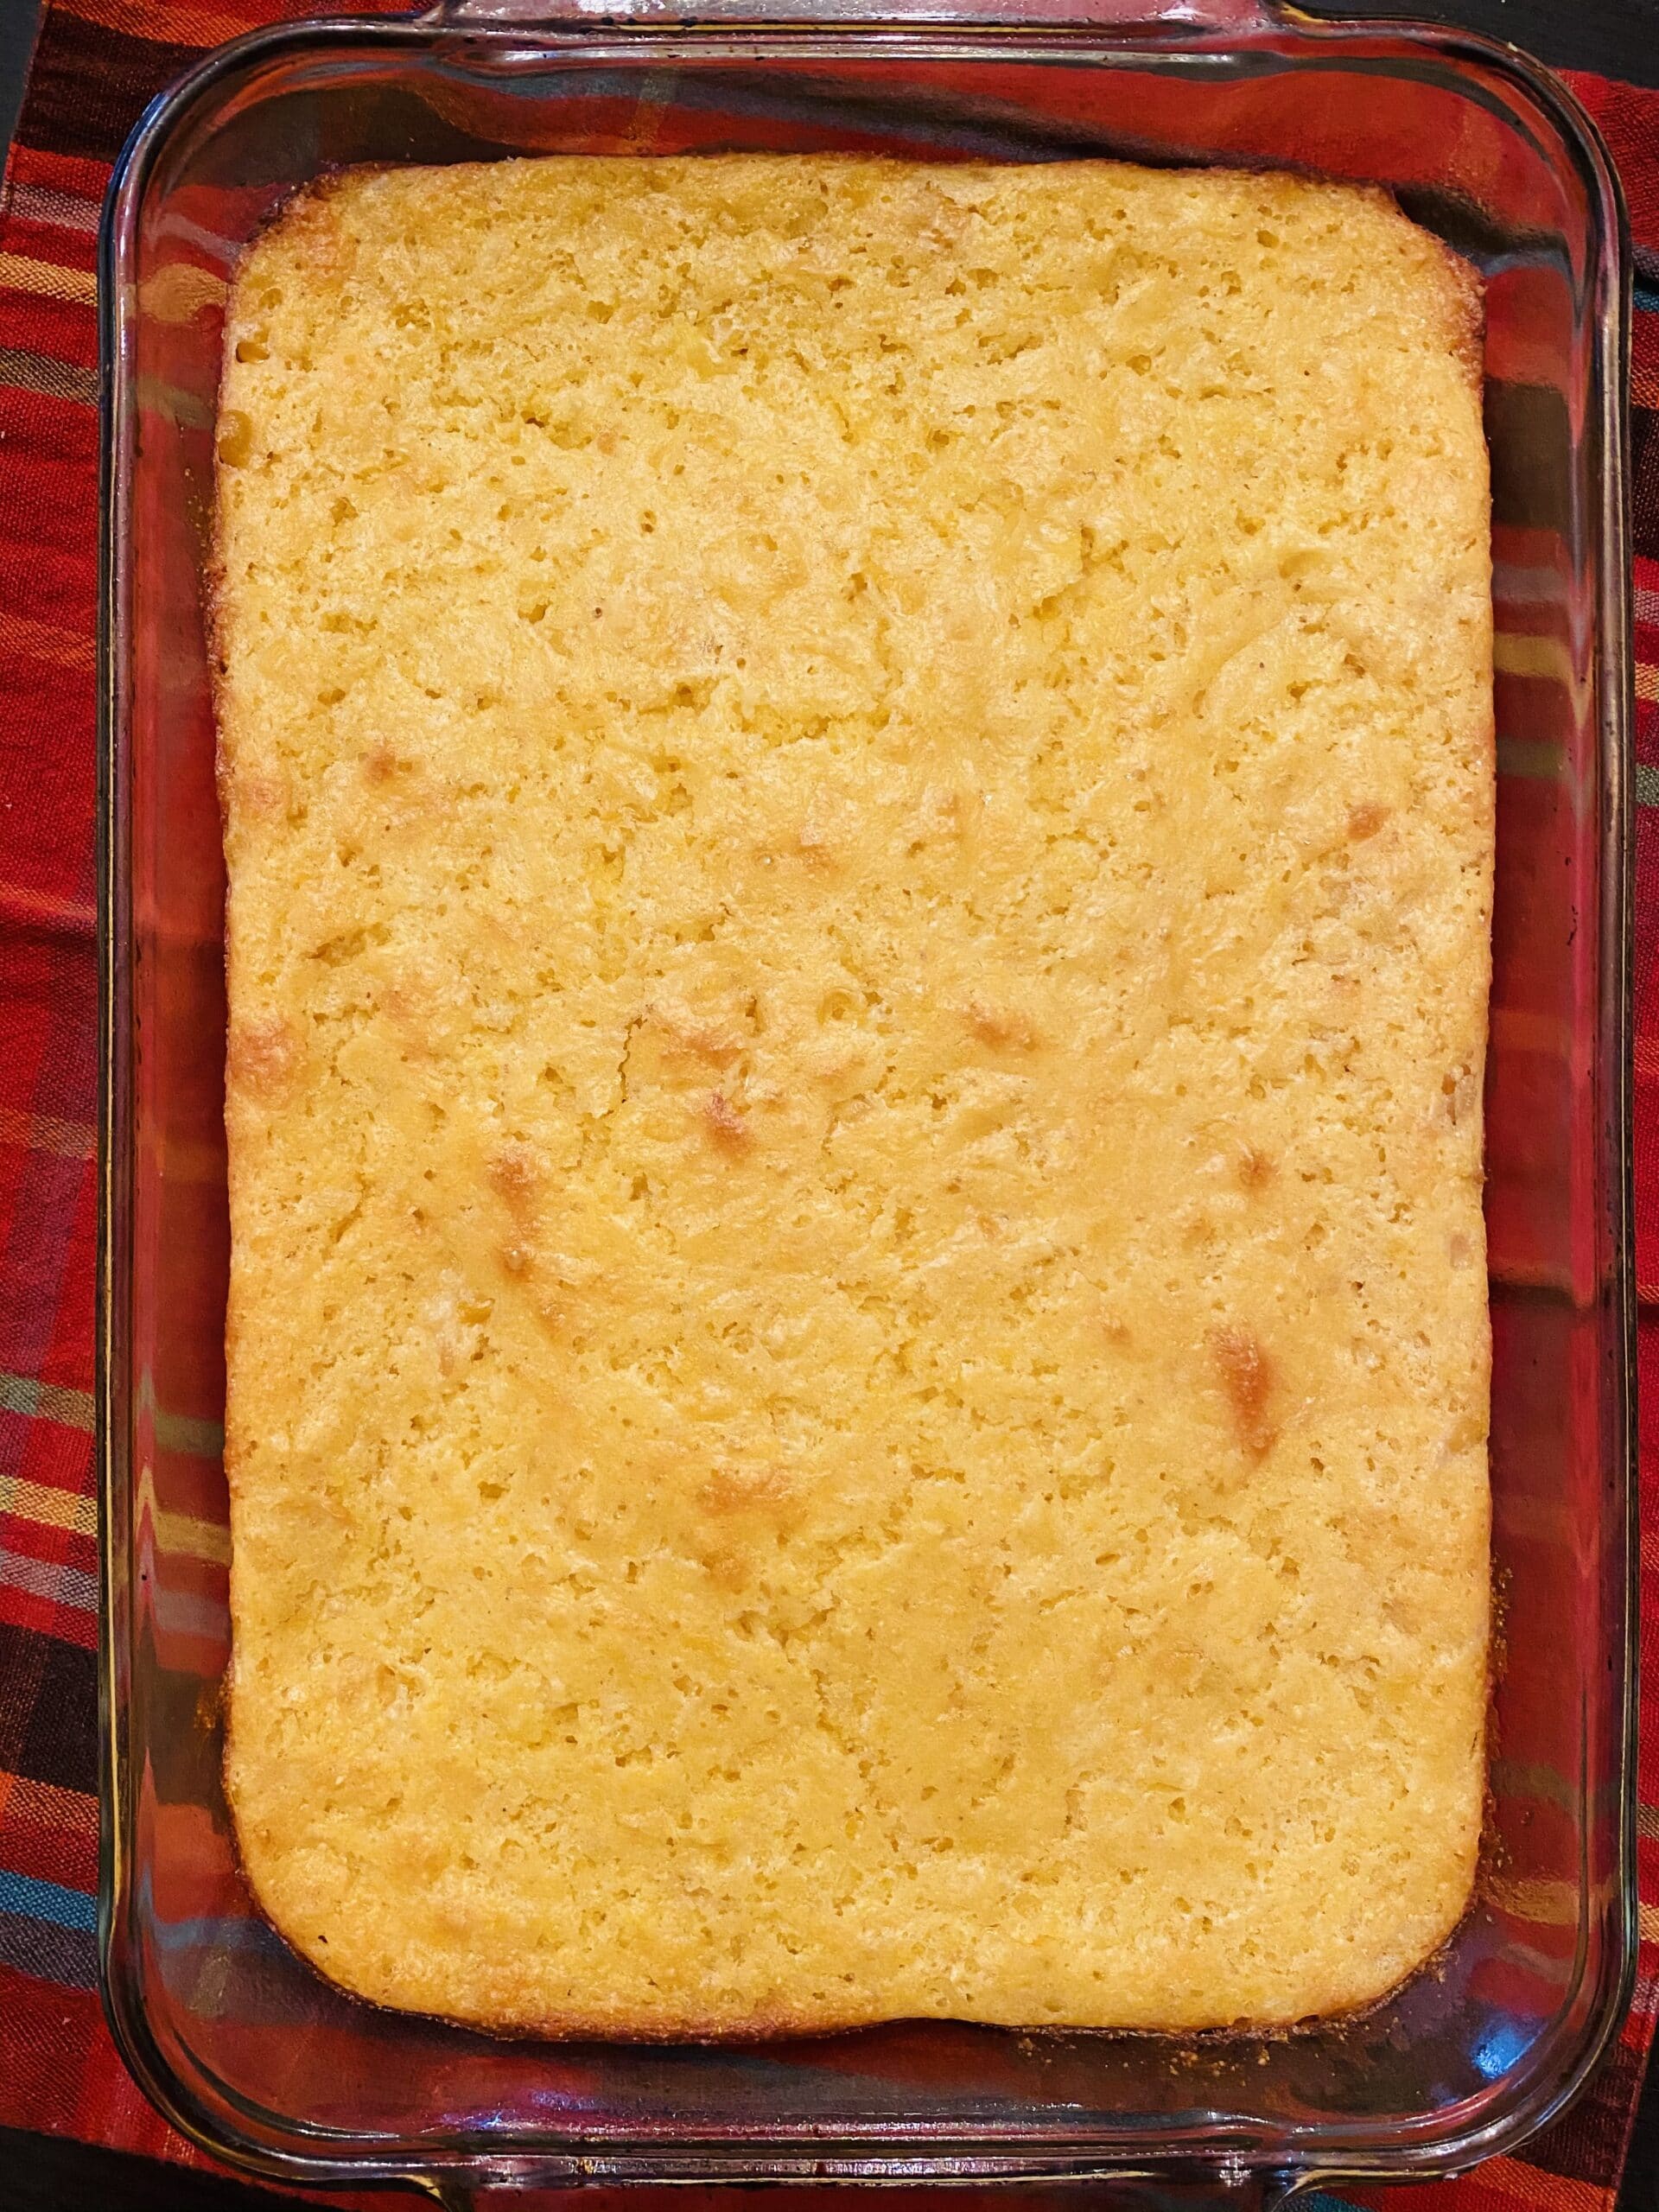 Corn Bread Casserole fresh out of the oven